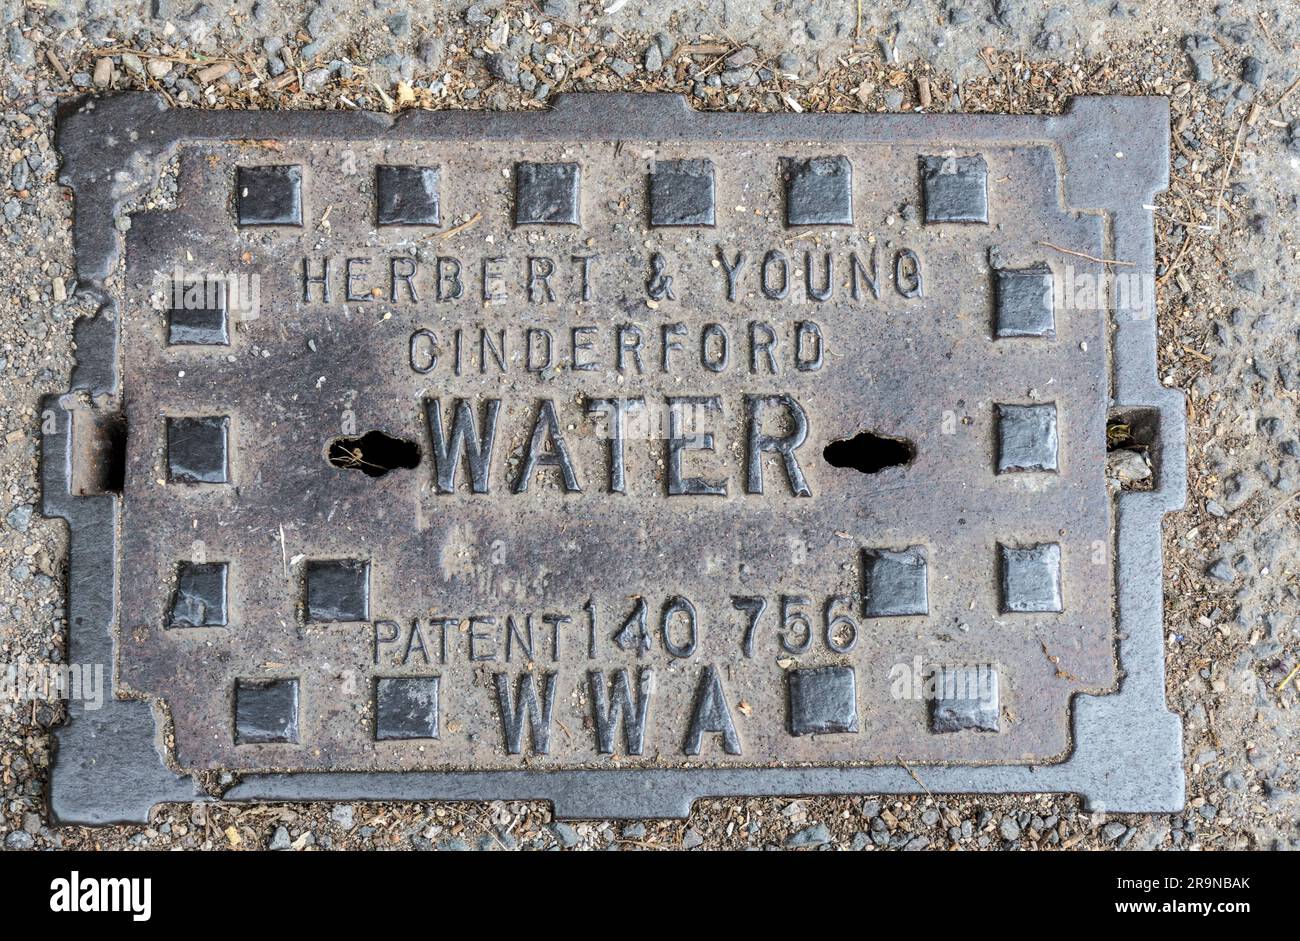 Water mains iron cover in road. England, UK. Stock Photo